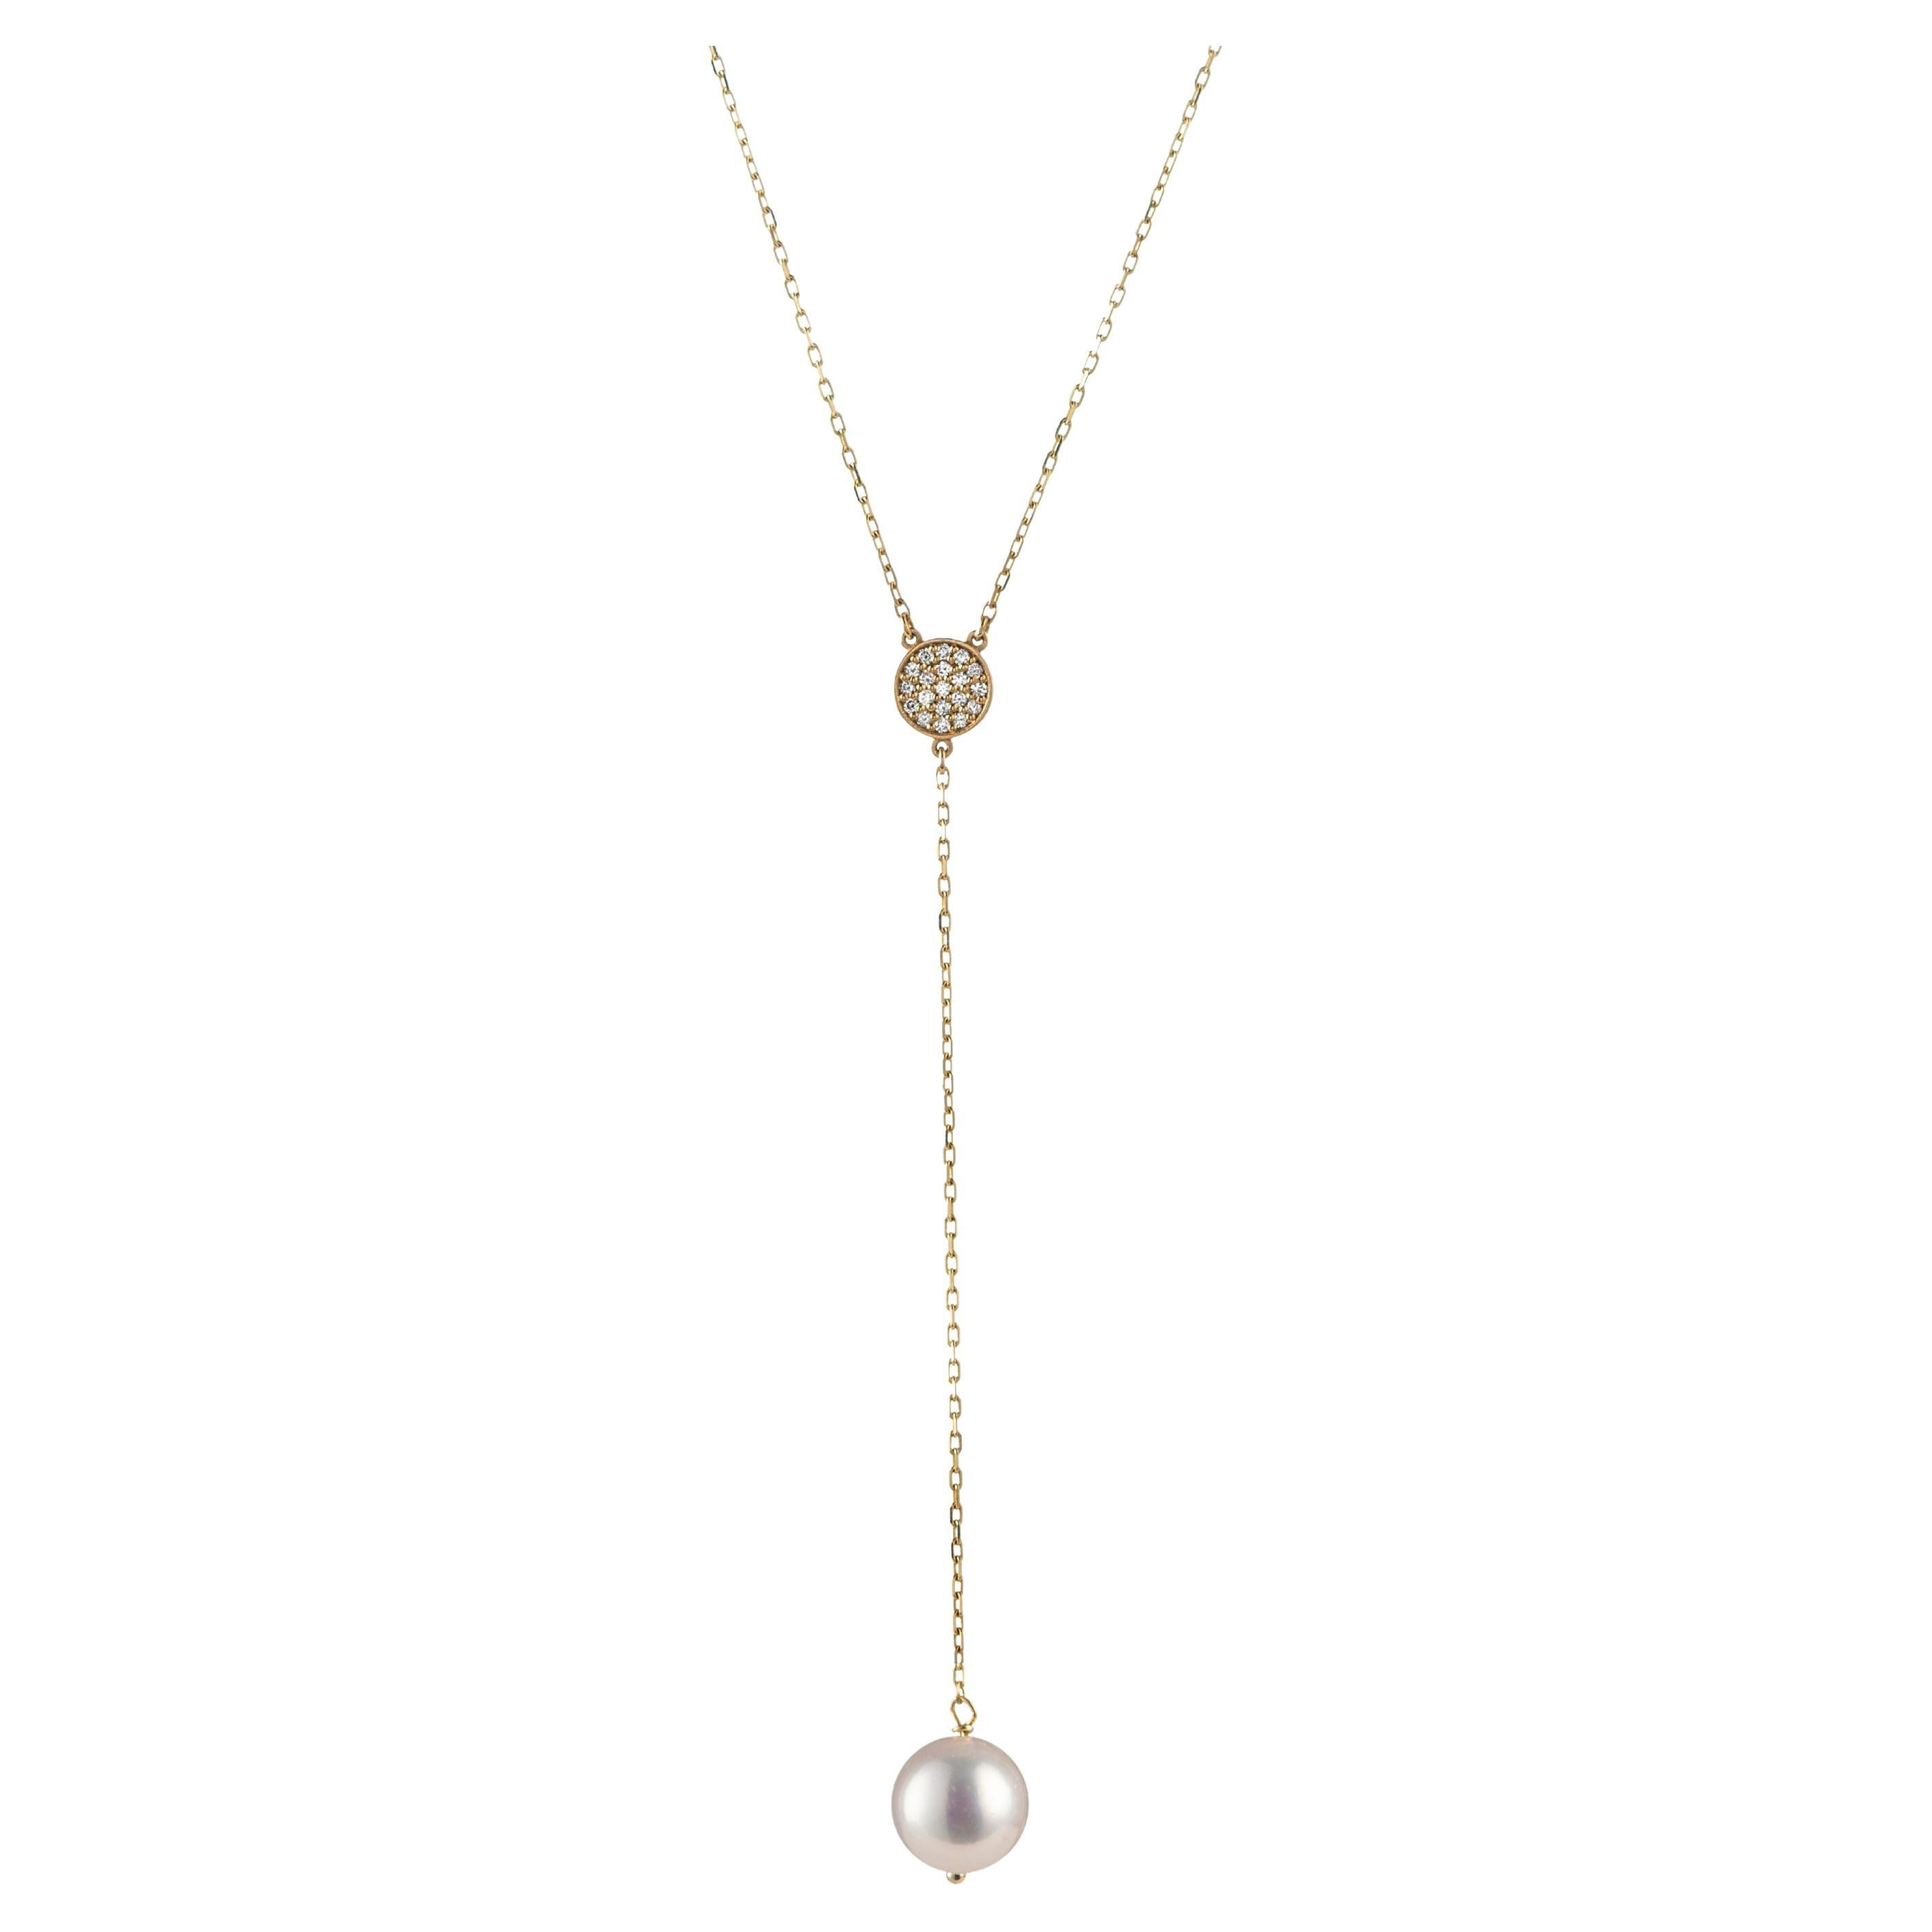 Diamond and Pearl Lariat Necklace, 18K